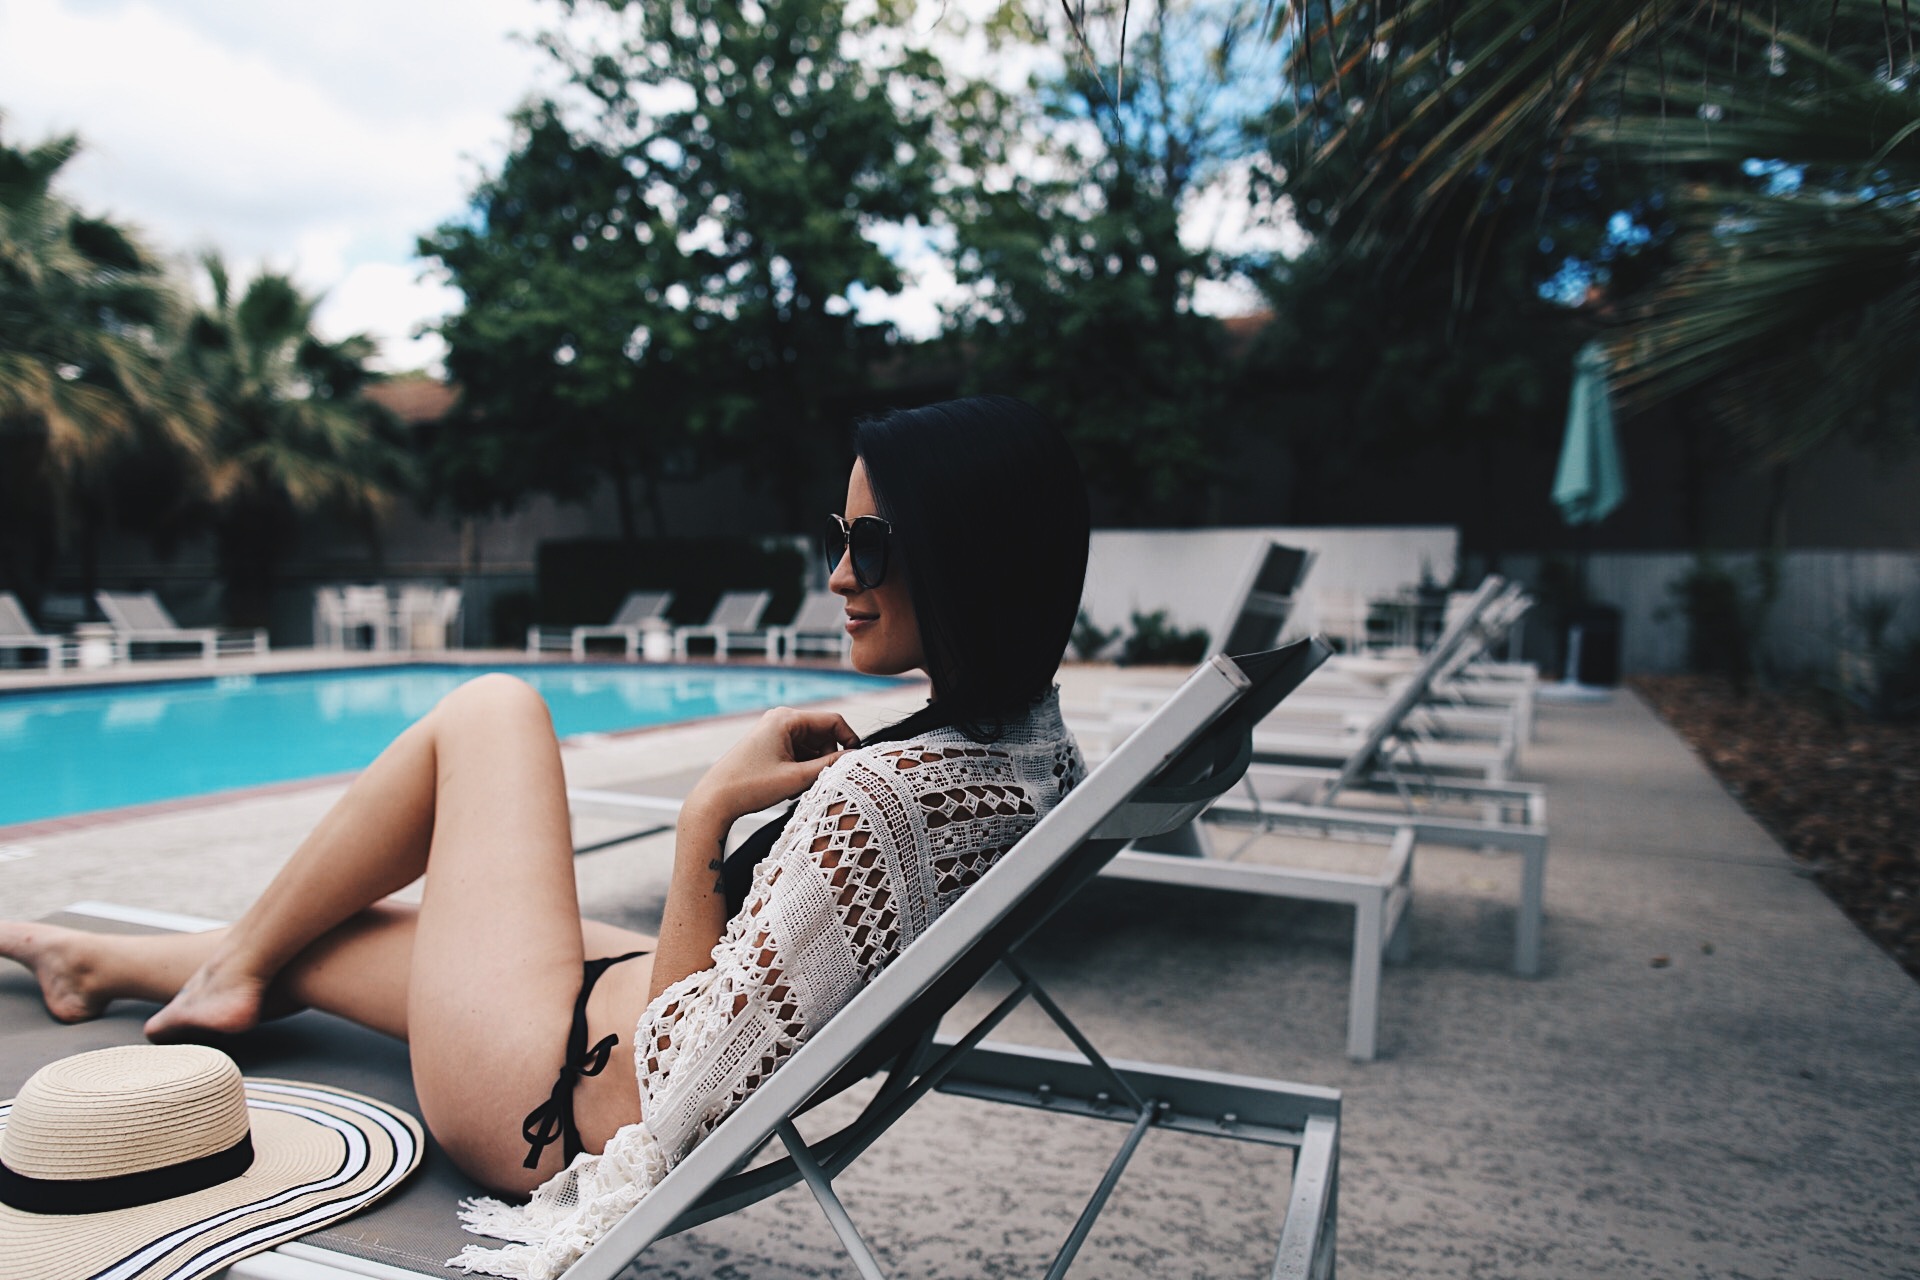 DTKAustin is sharing her pool day essentials and favorite affordable little black bikinis! Click for more pool day pics and outfit details.